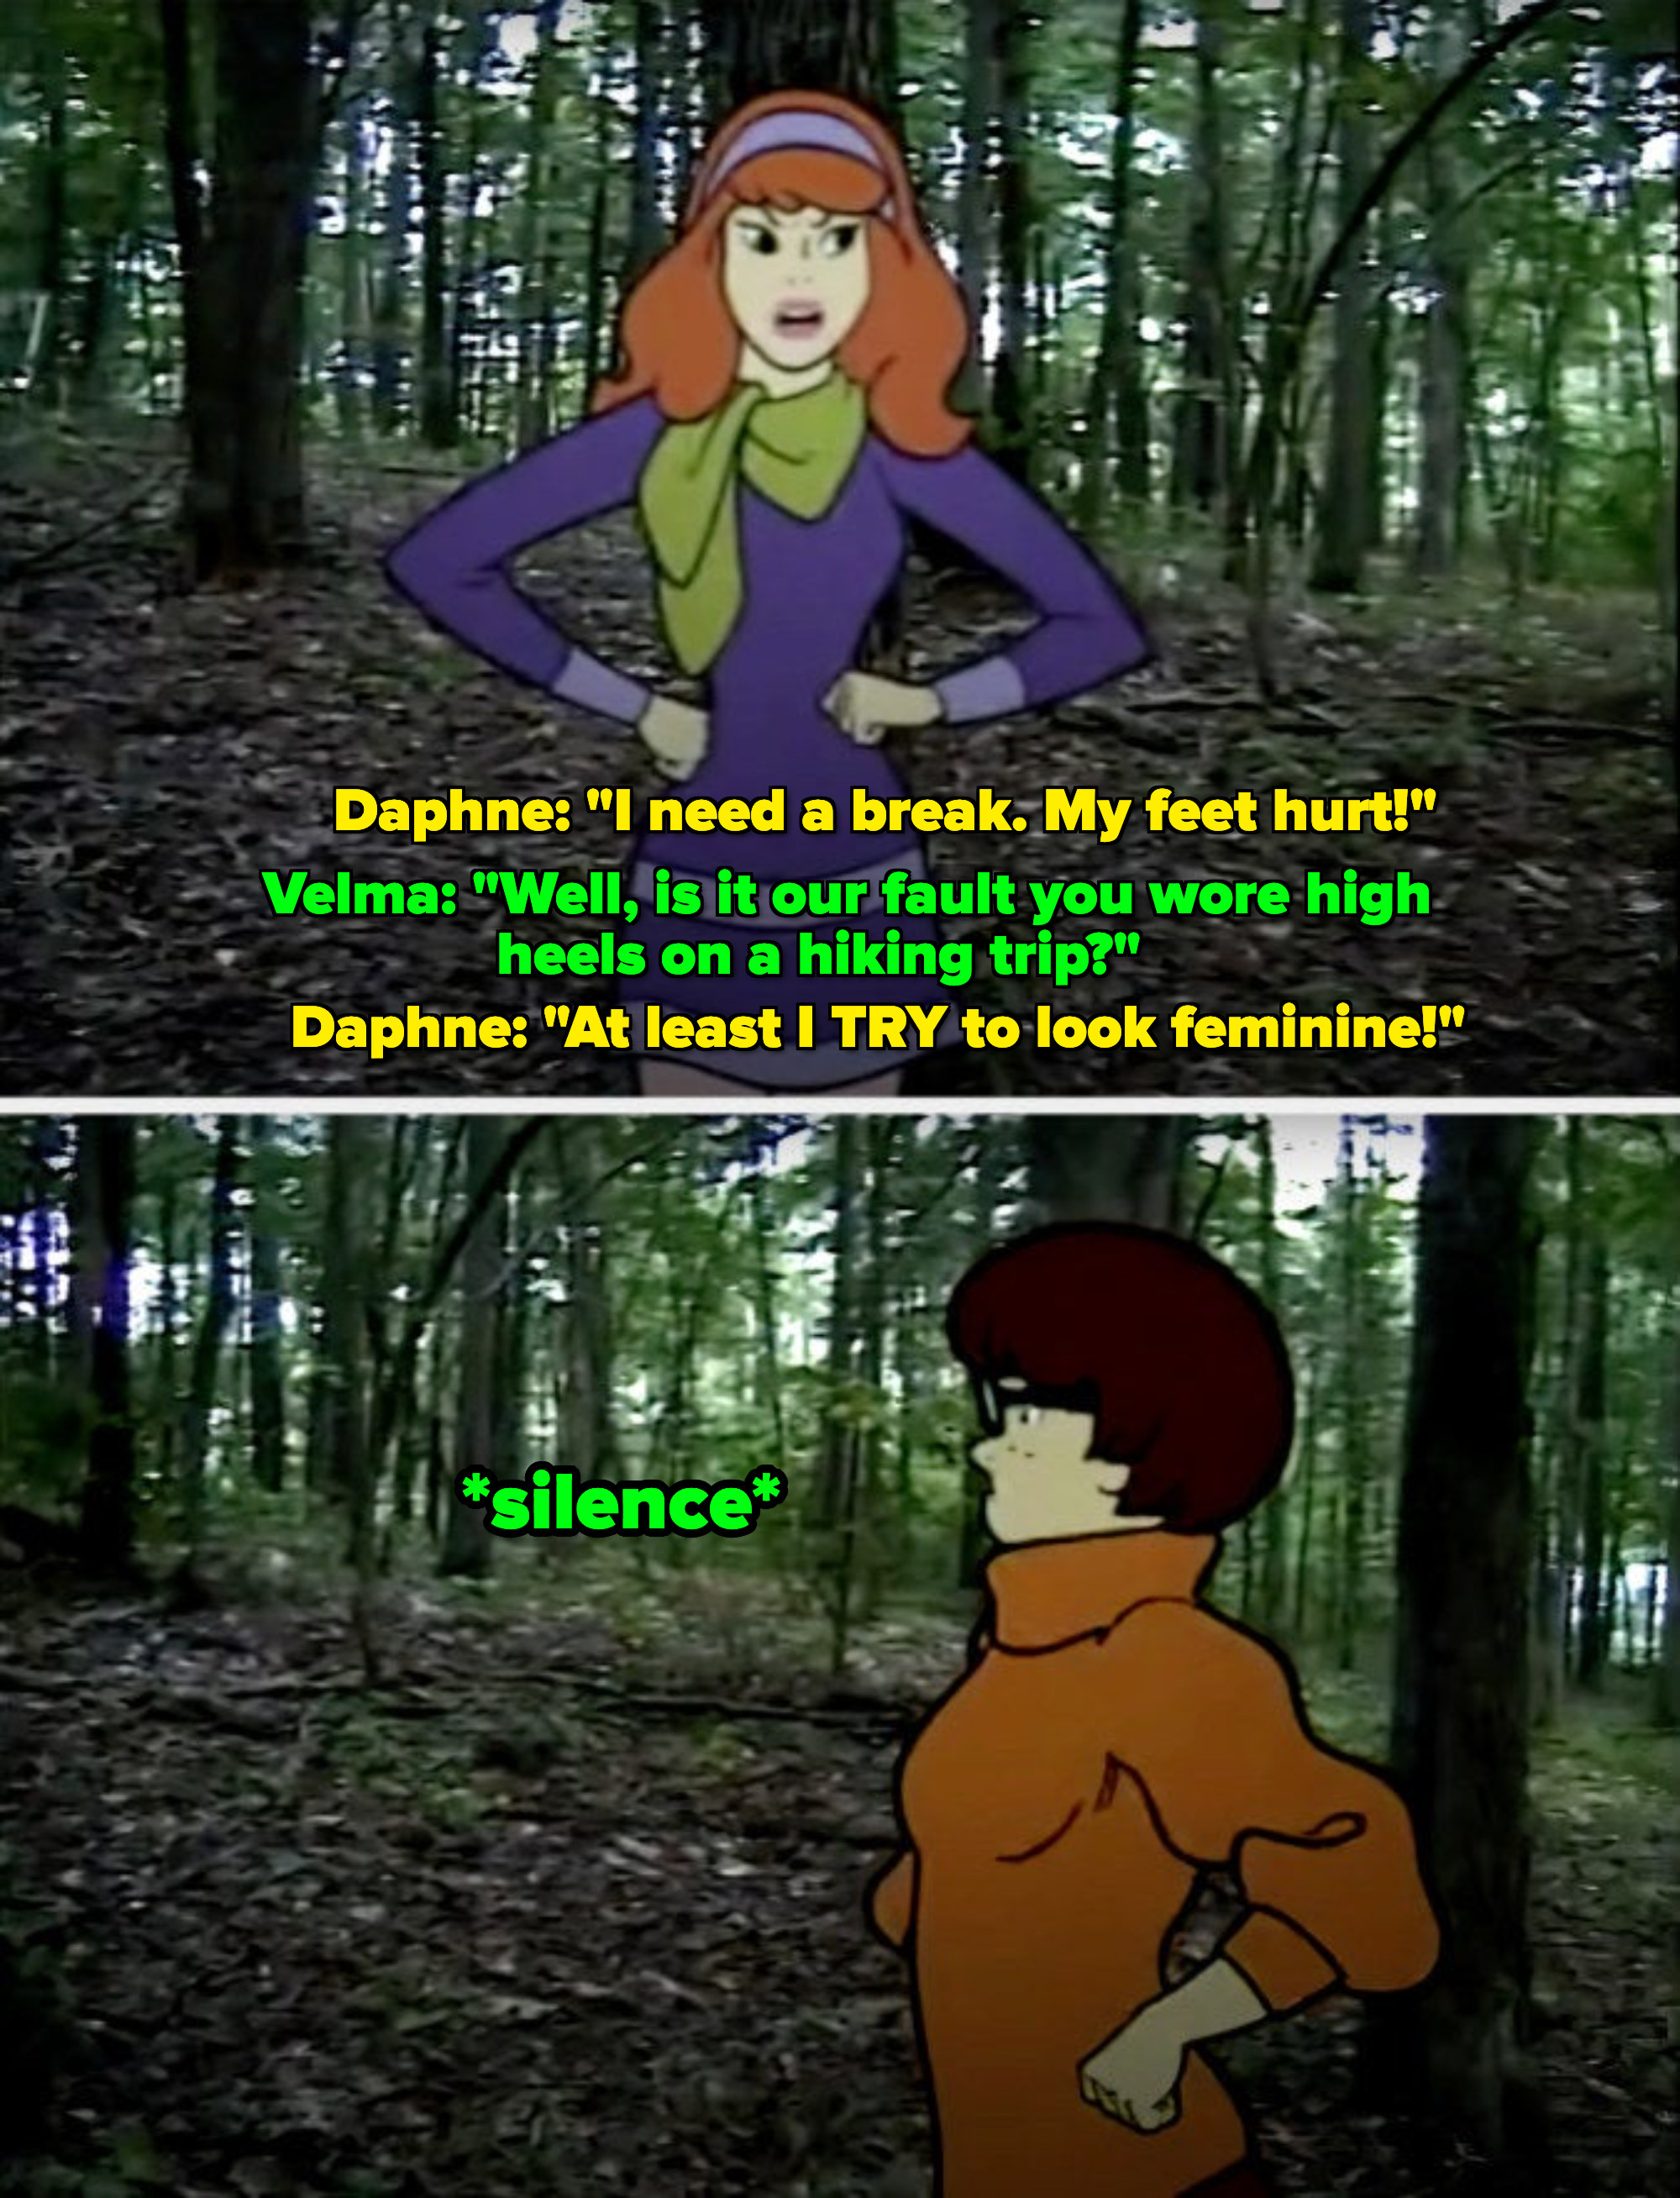 Daphne yells that at least she tries to look feminine to Velma